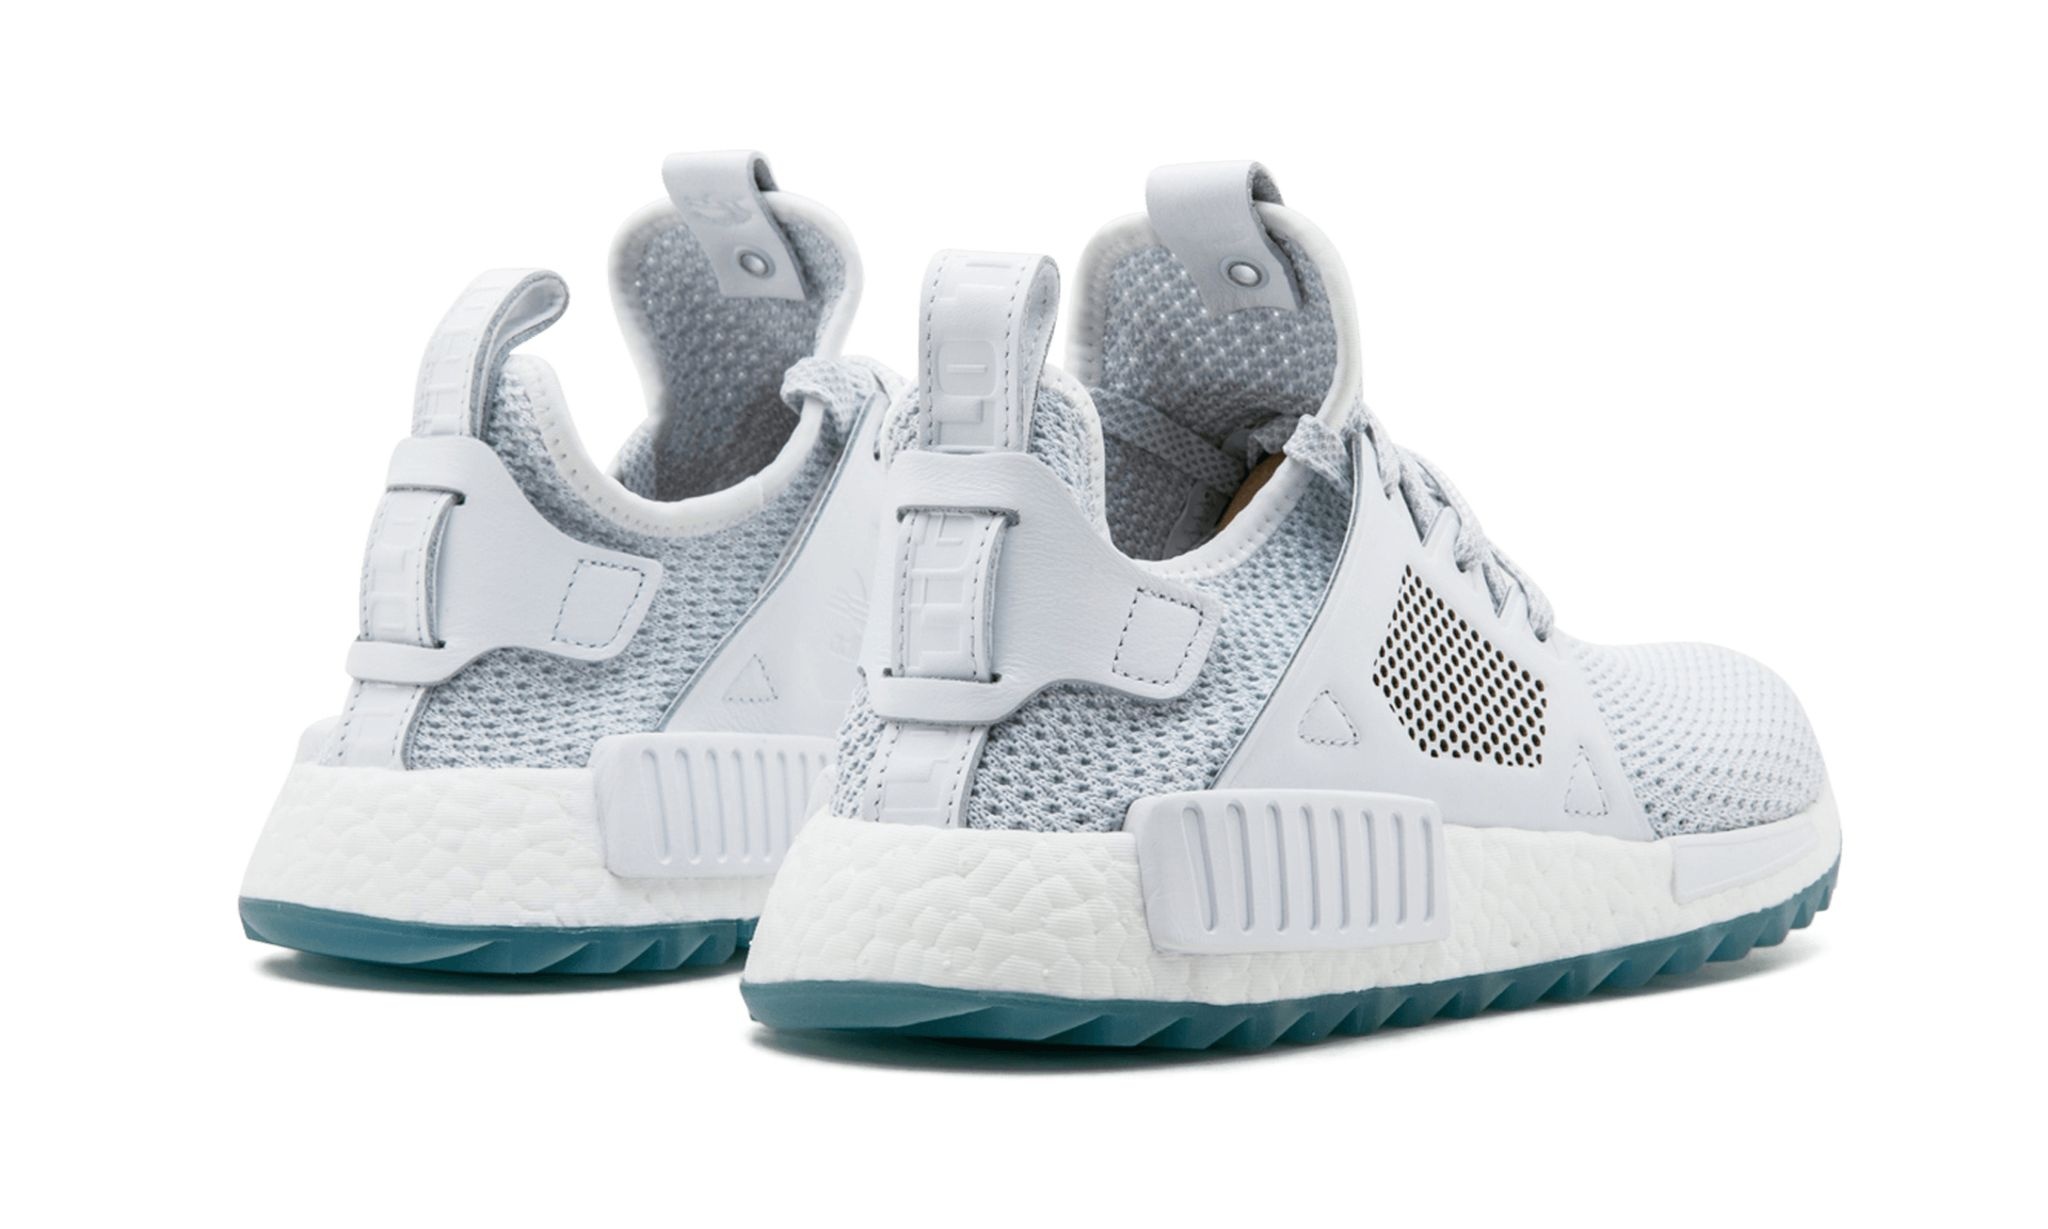 NMD_XR1 TR Titolo "Celestial" - 3